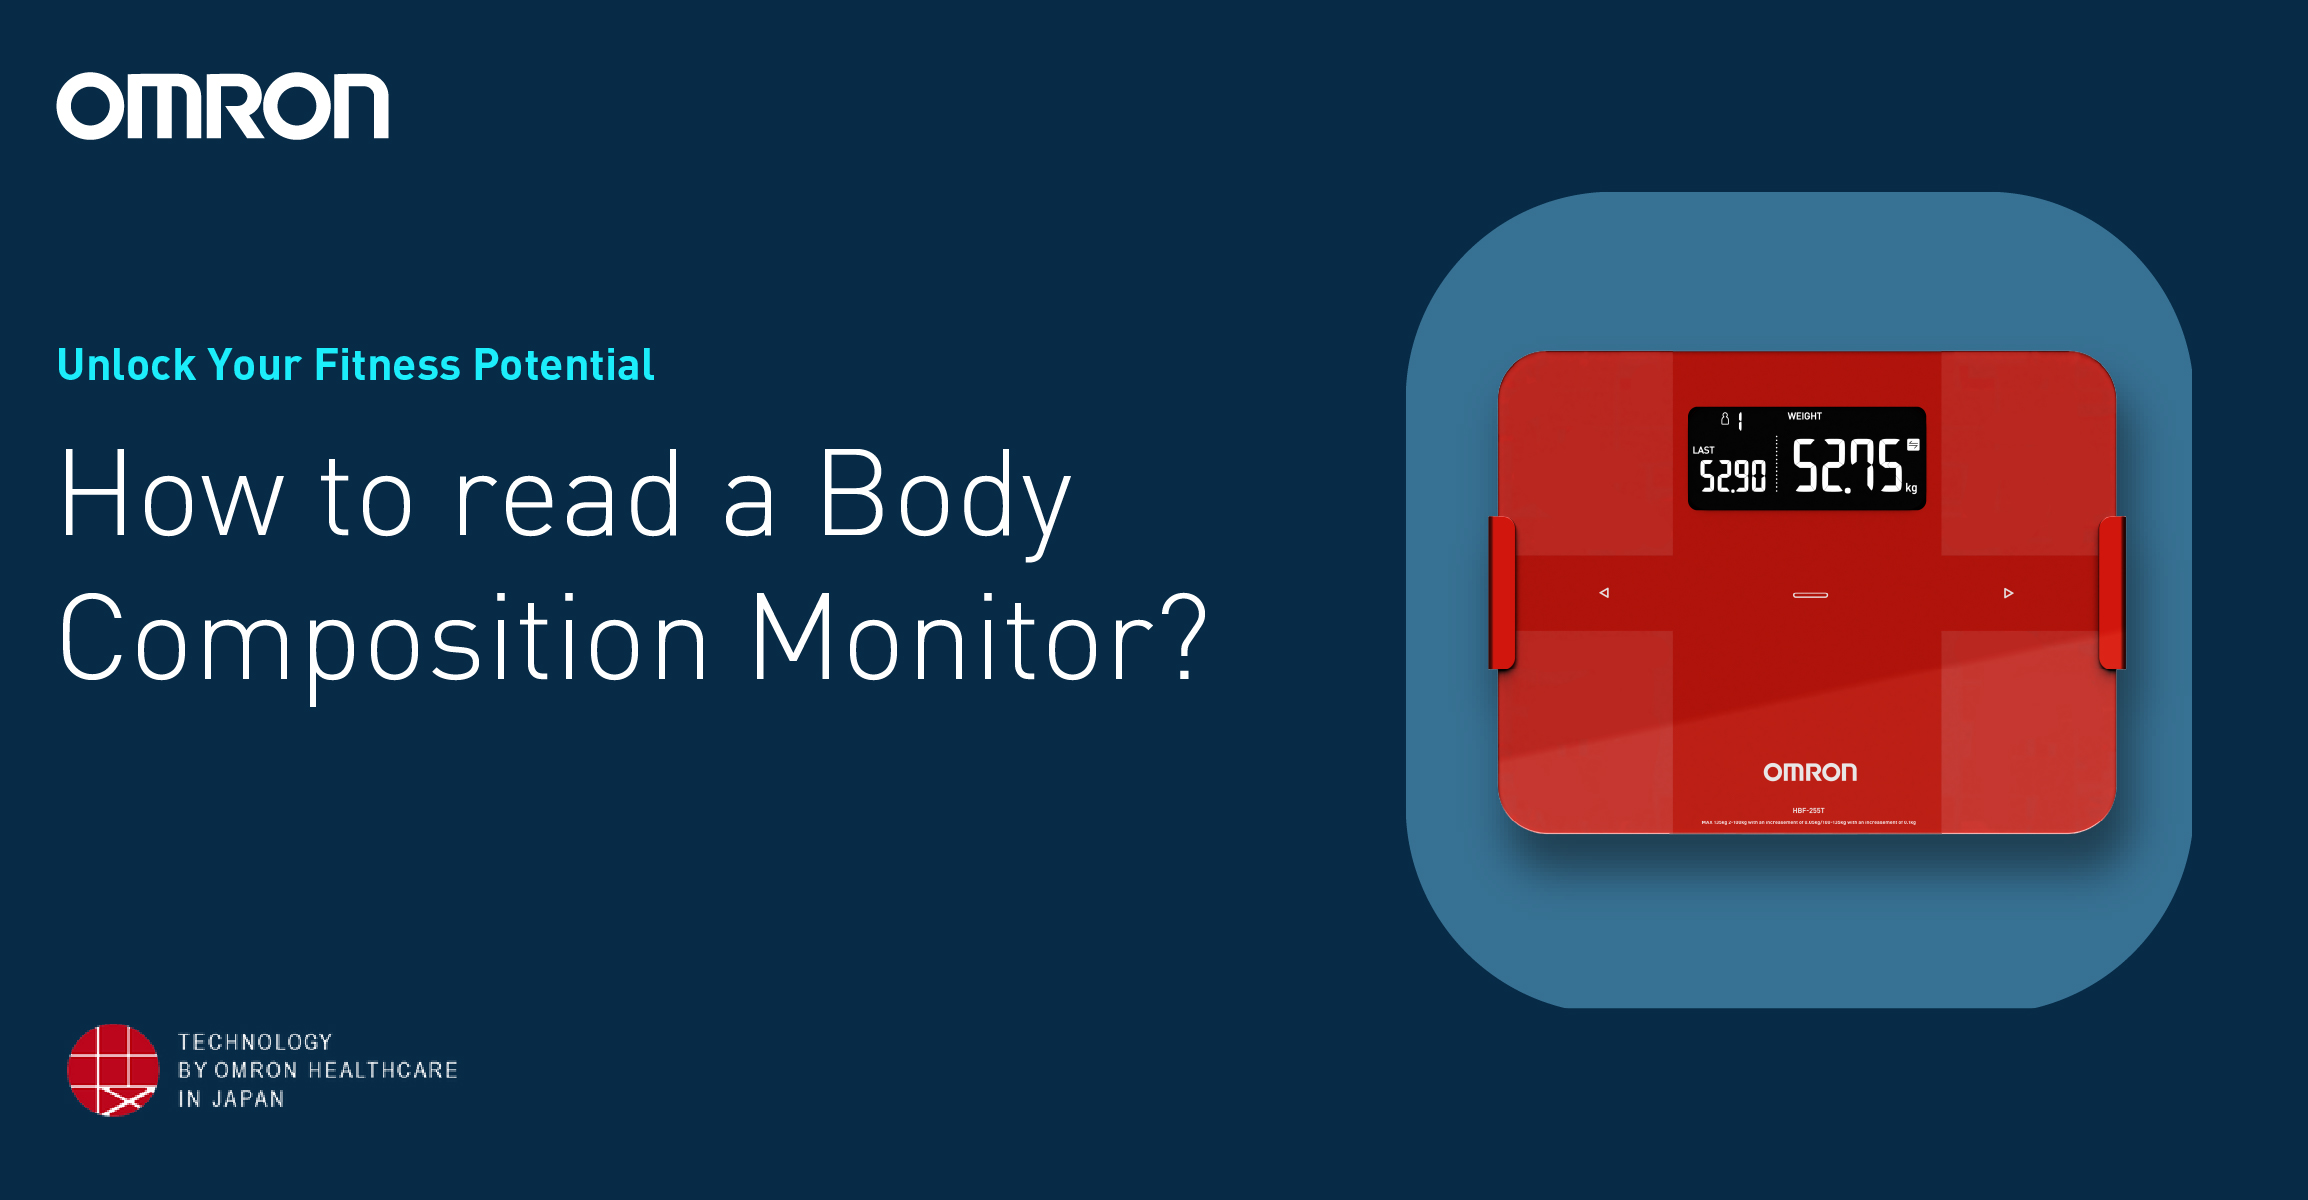 Omron Body Composition Monitor and Scale with Bluetooth Connectivity